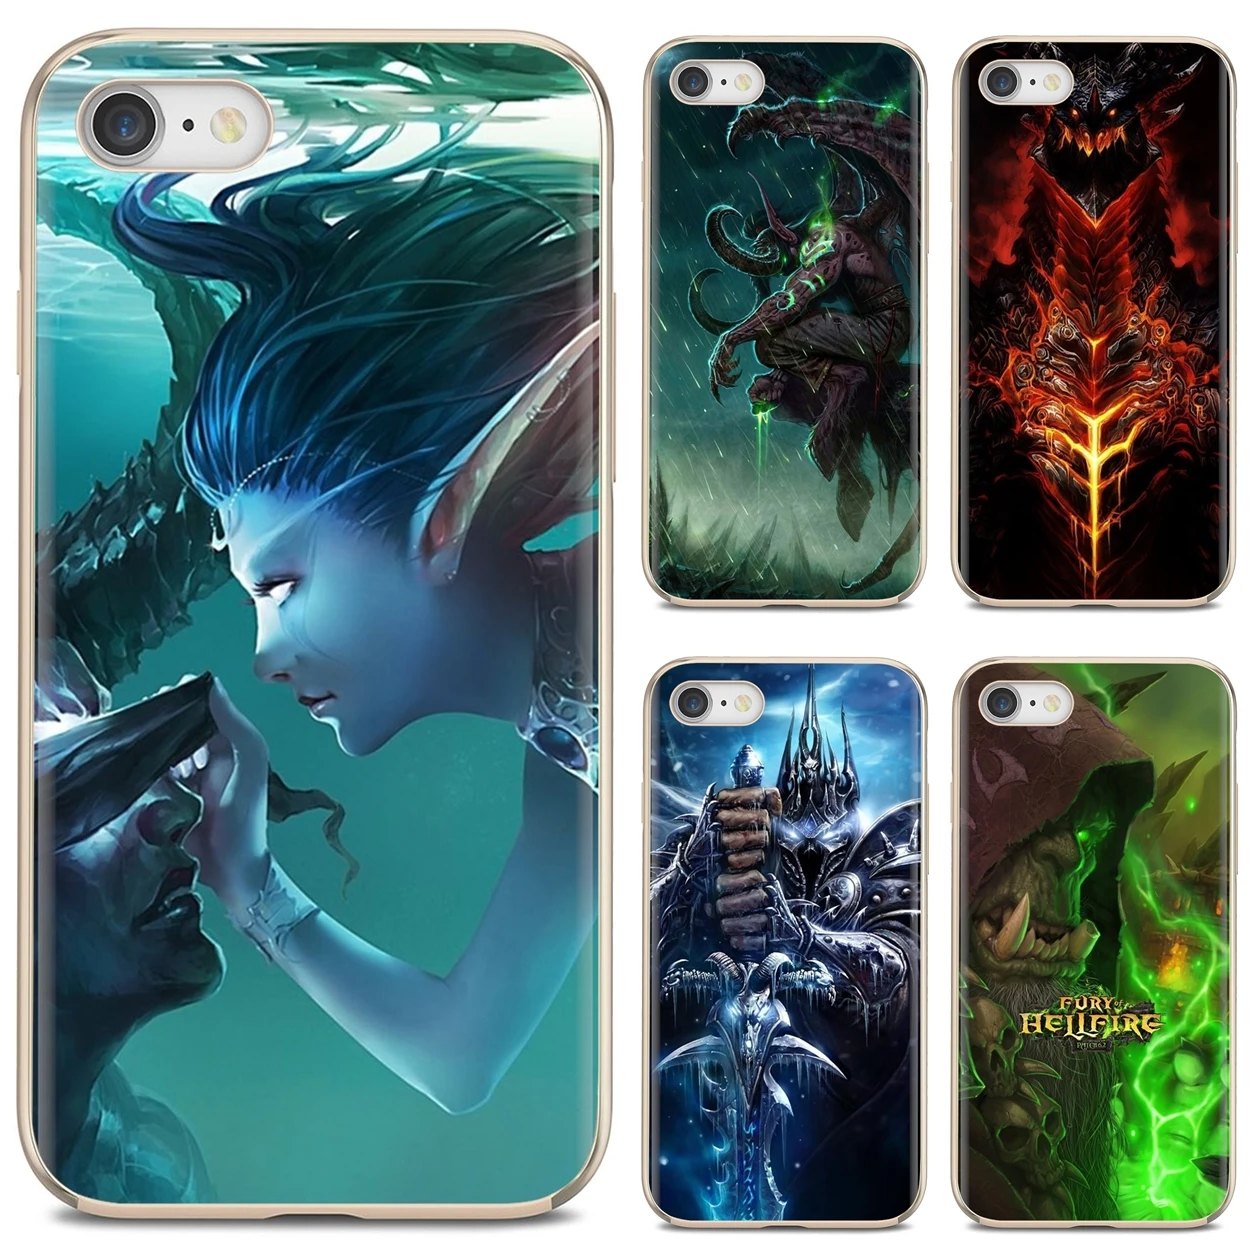 WOW Games Poster Soft Silicone TPU Case For Huawei Y6 Y5 2019 For Xiaomi Redmi Note 4 5 6 7 8 Pro Mi A1 A2 A3 6X 5X 7A phone cases for xiaomi